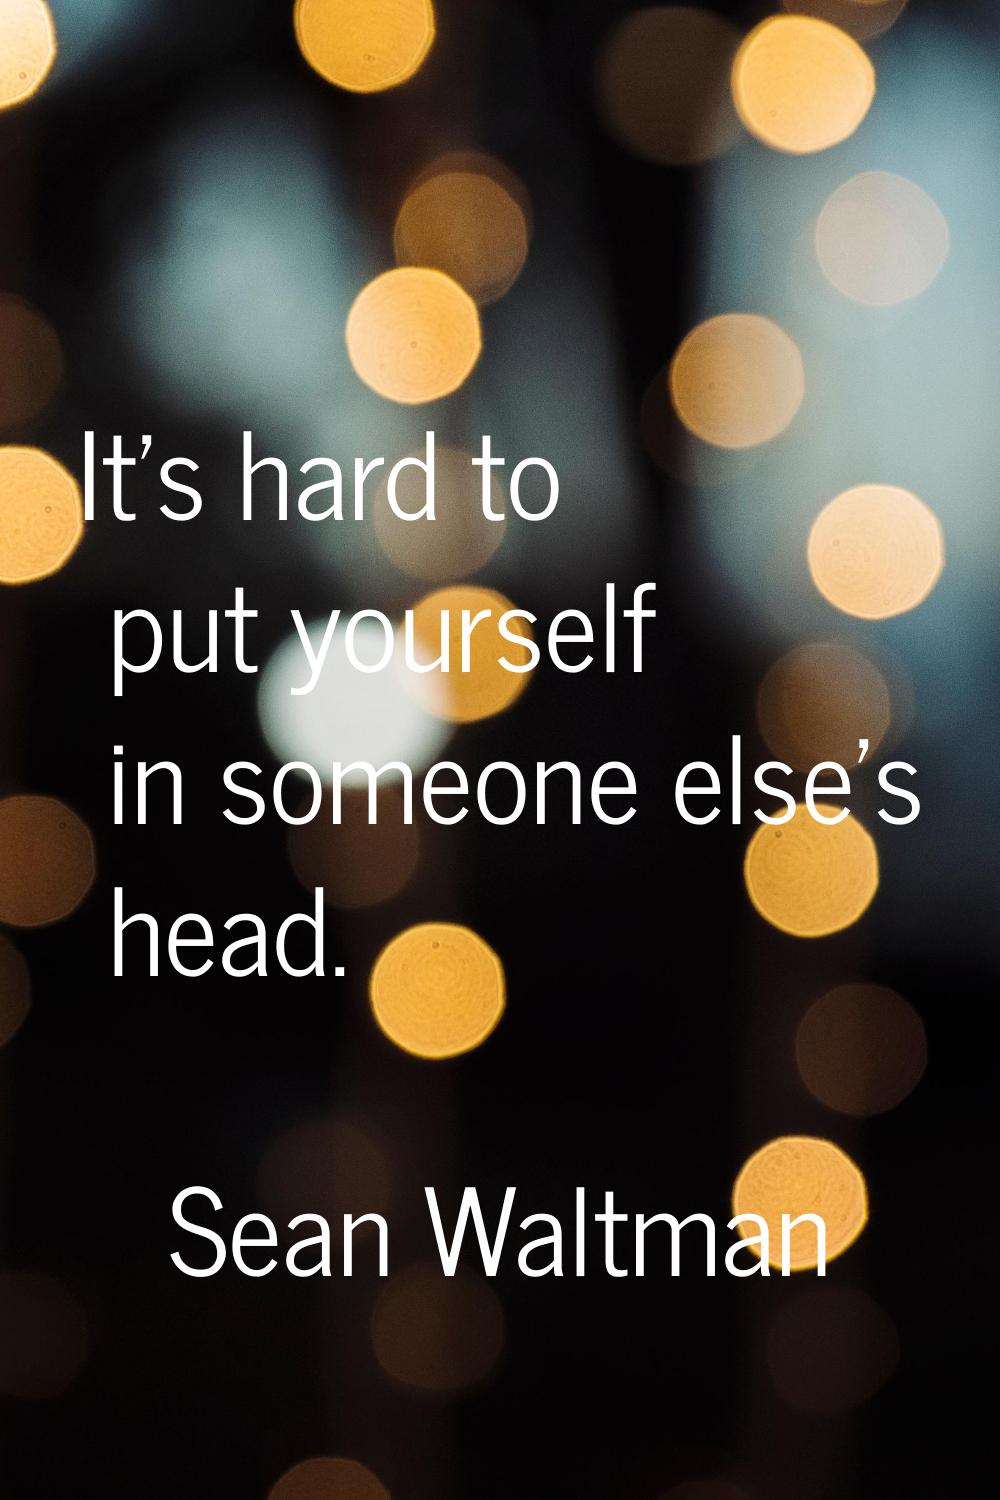 It's hard to put yourself in someone else's head.